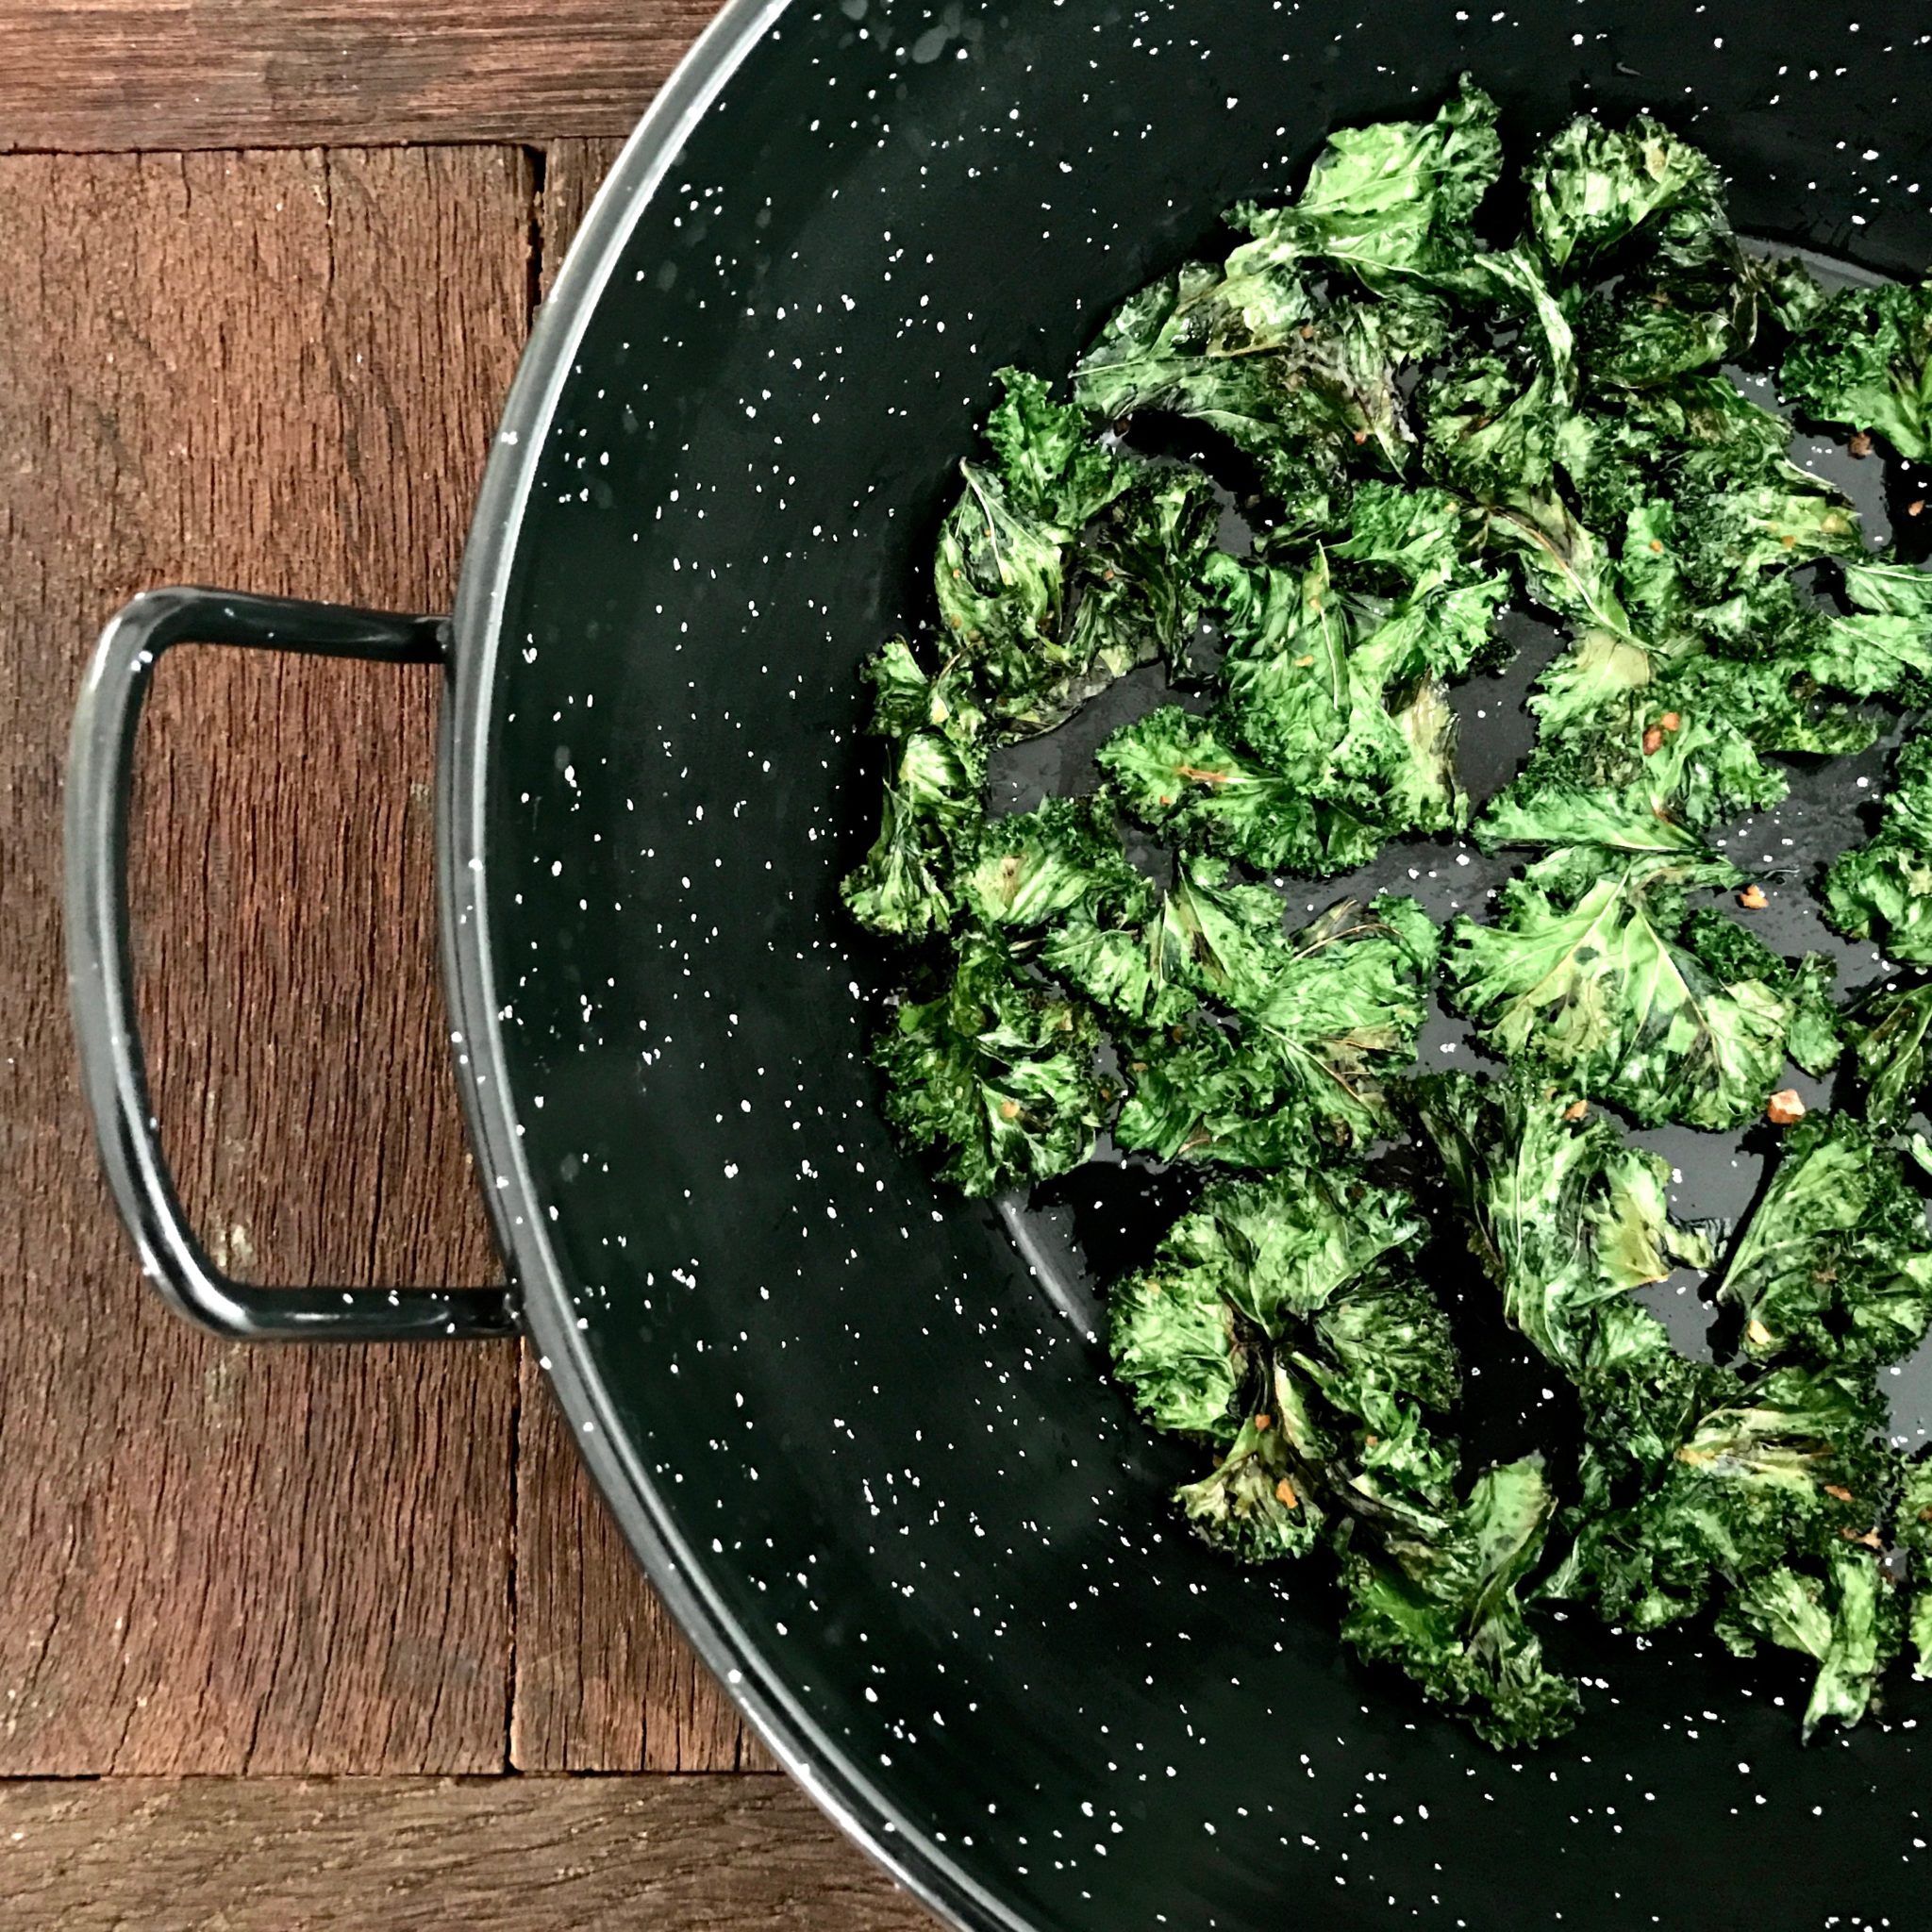 Kale Chips without an oven!